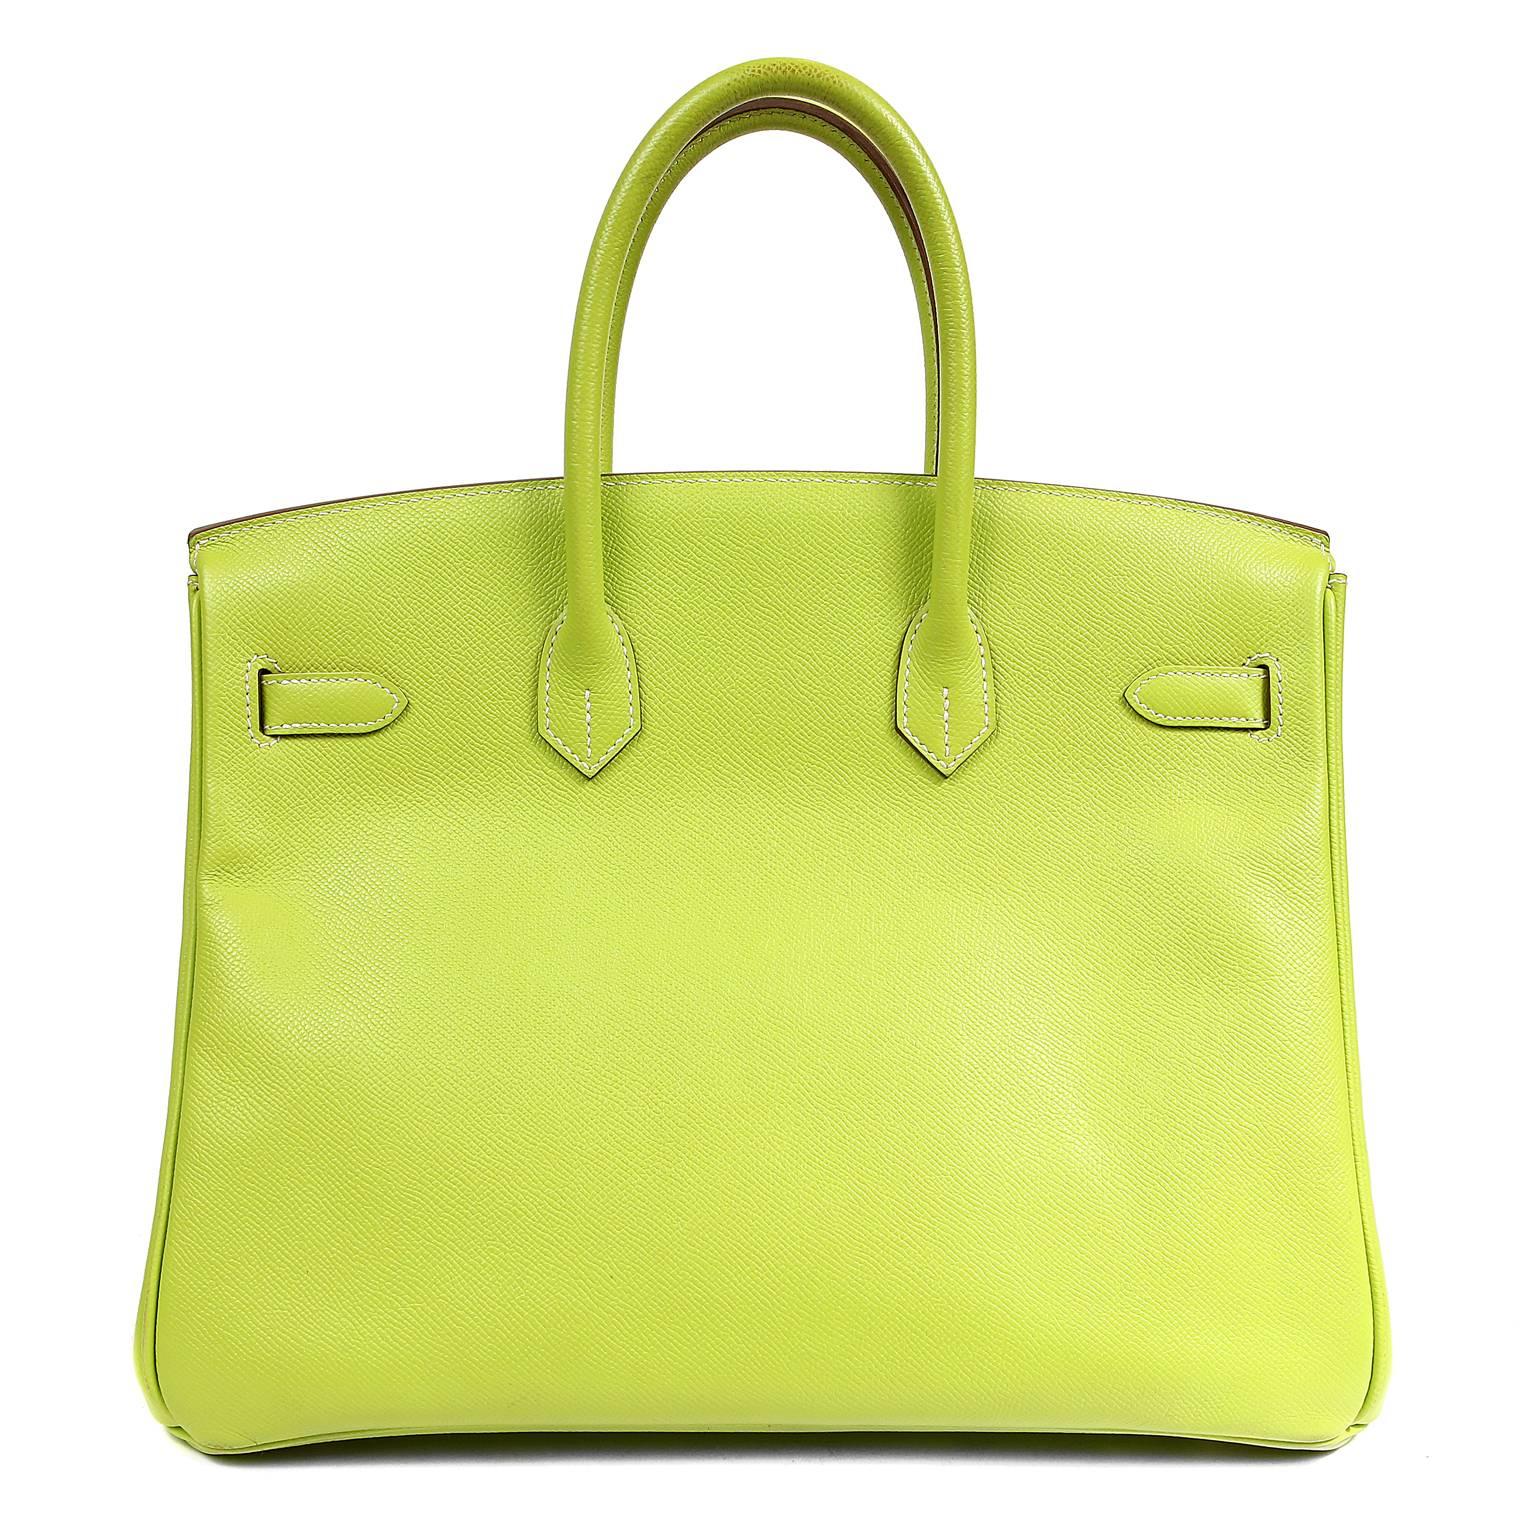 Hermès Kiwi Epsom 35 cm Birkin- PRISTINE, Never Carried
Protective plastic intact on the hardware.   
 Considered the ultimate luxury item, the Hermès Birkin is stitched by hand. Waitlists are commonplace.   This vibrant pop of green is especially